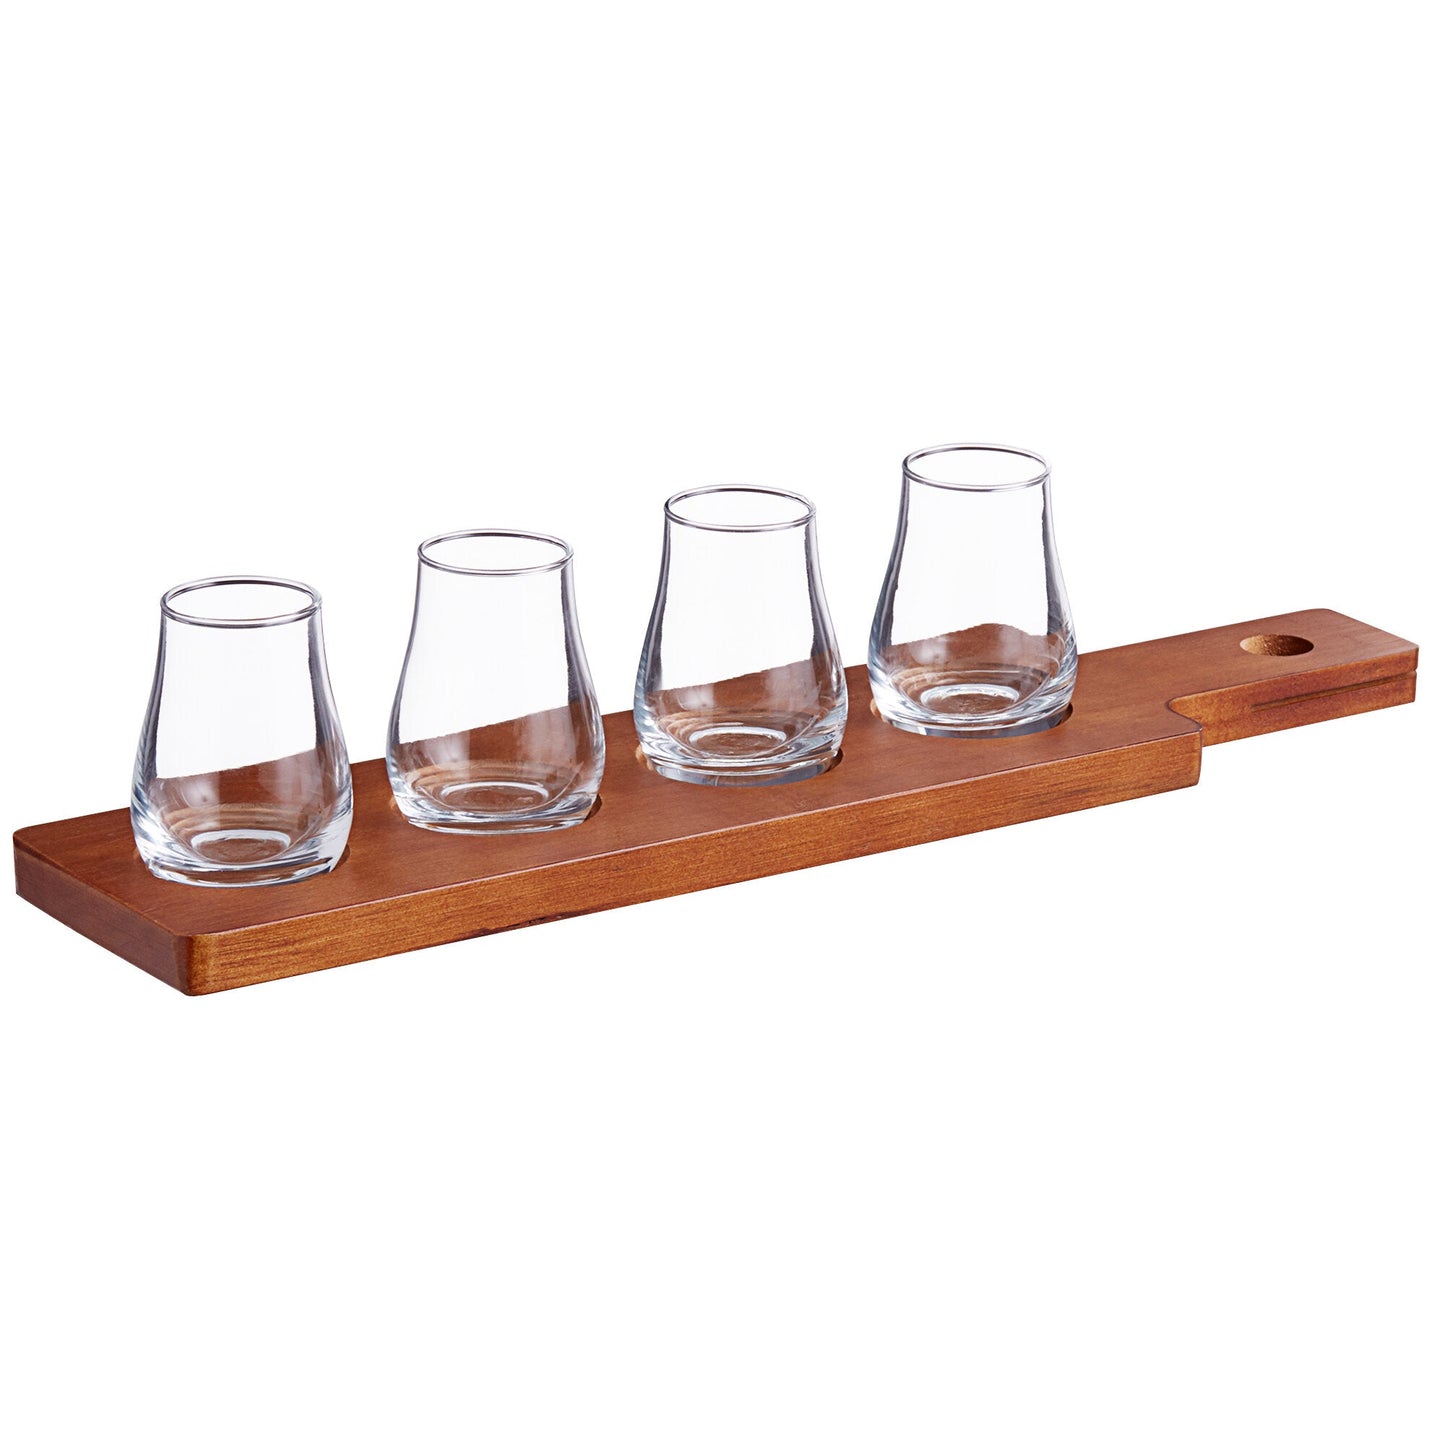 Flight Paddle with Whiskey Tasting Glasses by The Whiskey Ball